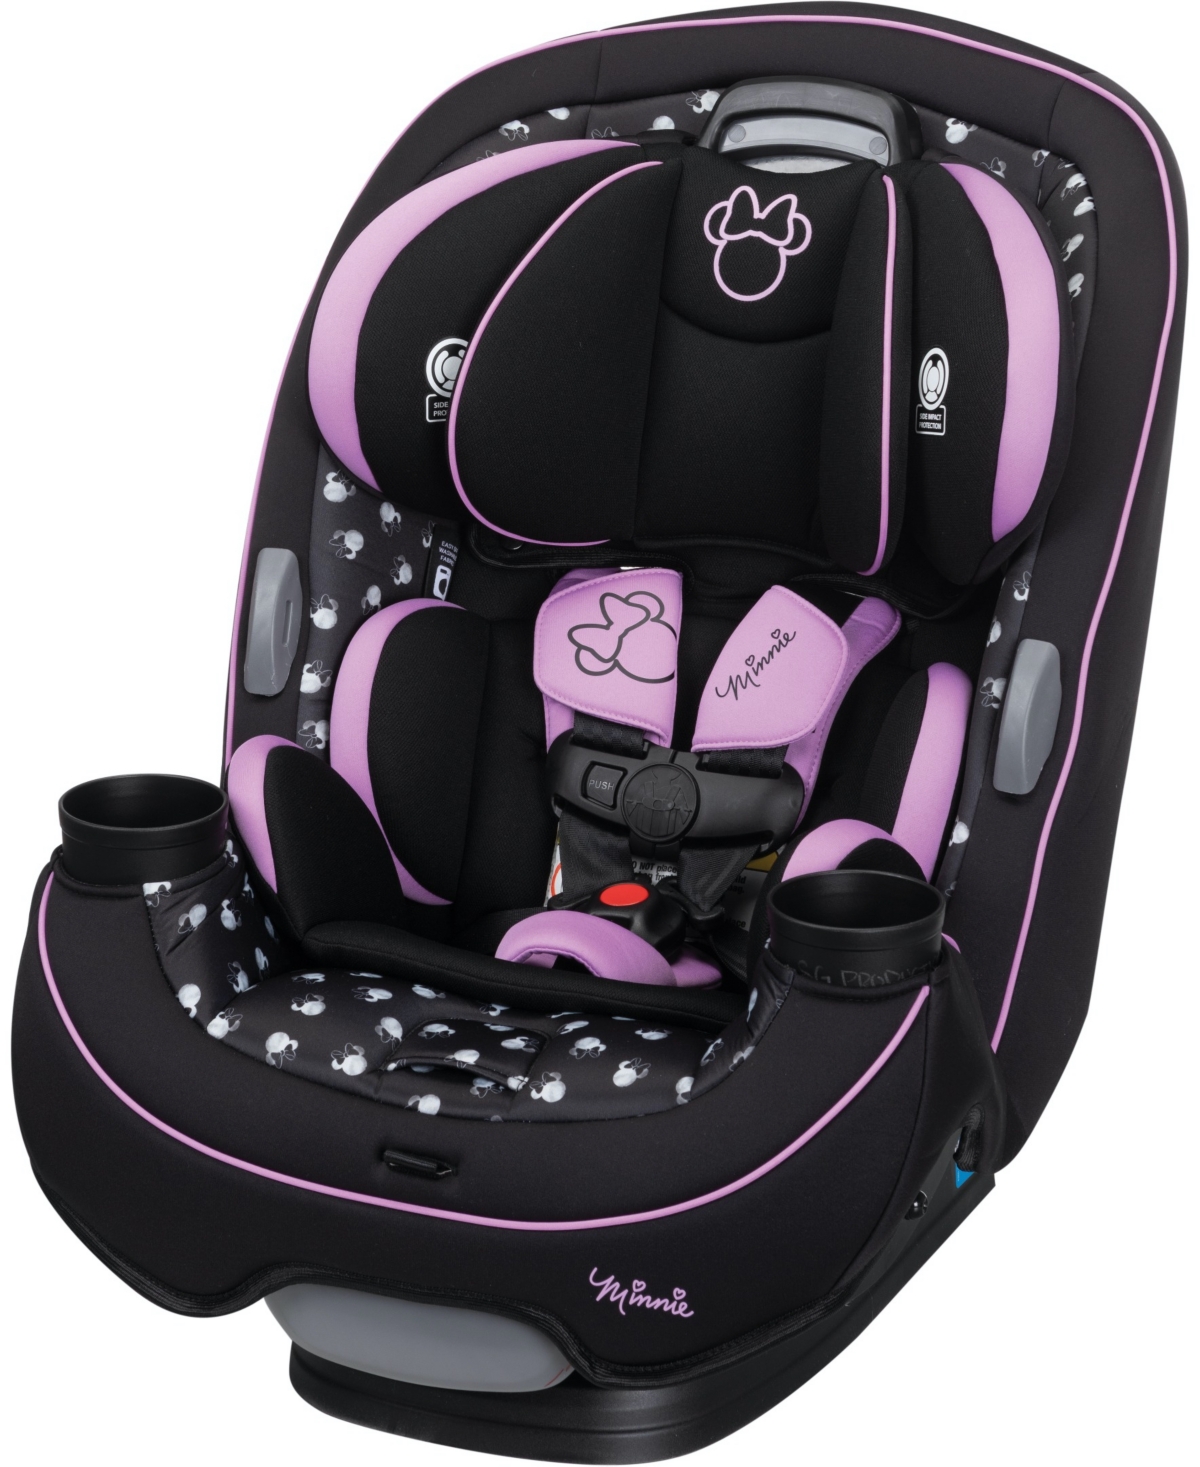 Disney Baby Grow And Go 3-in-1 Convertible One-hand Adjust Car Seat In Midnight Minnie